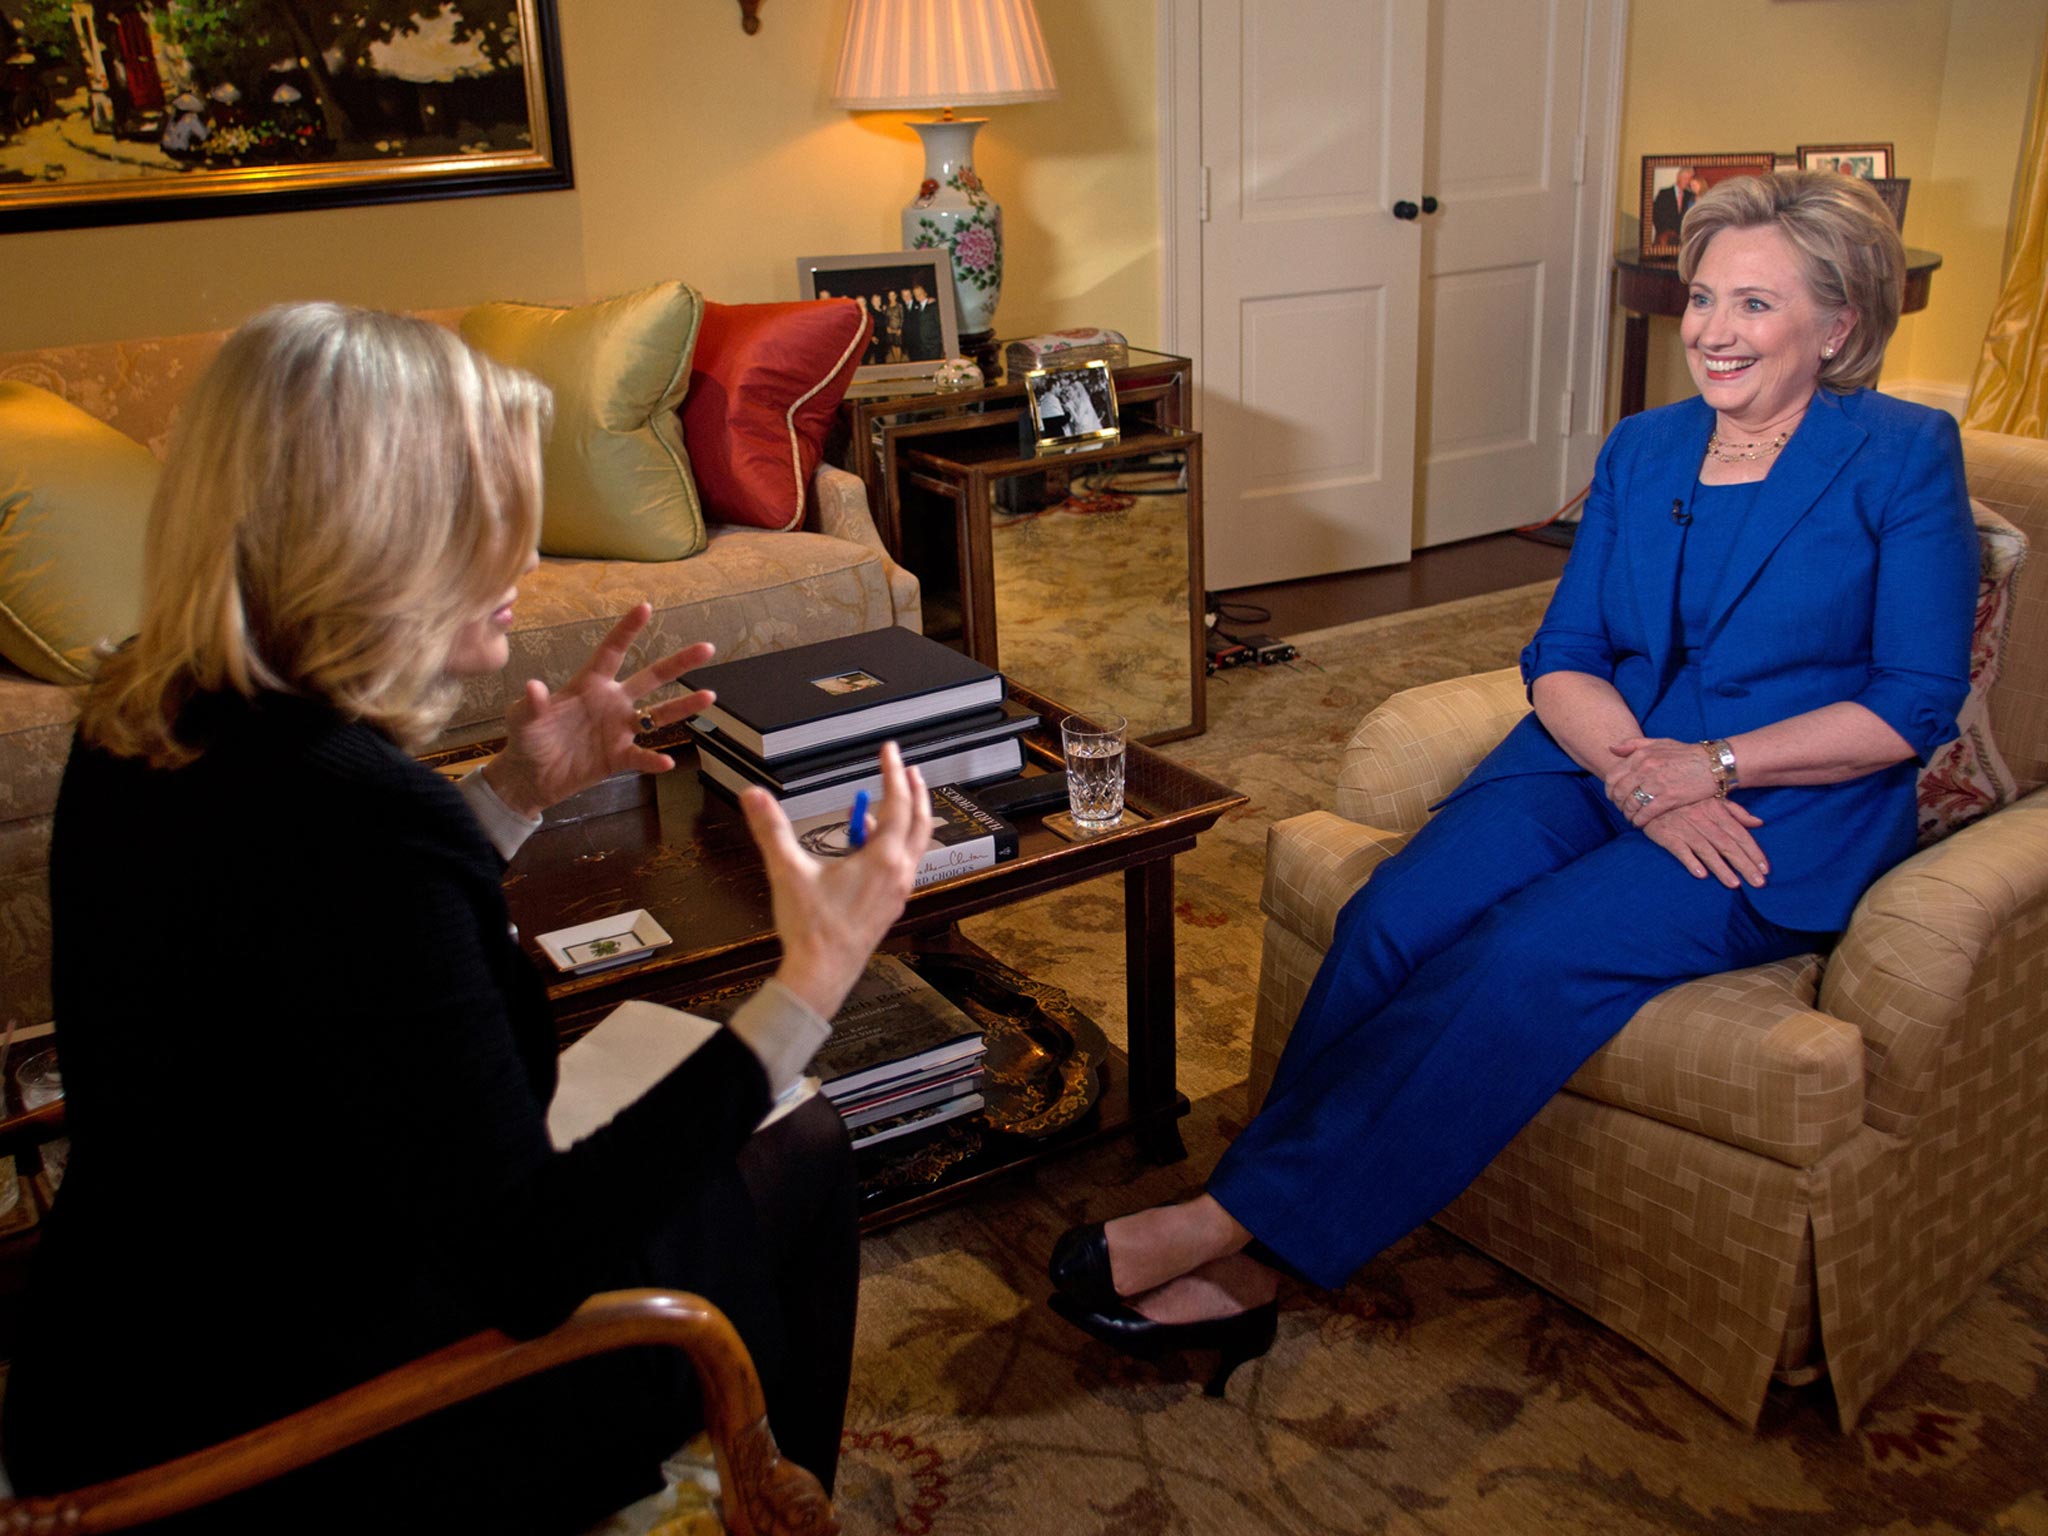 ABC's Diane Sawyer interviews Hillary Clinton at her home in Washington, D.C.